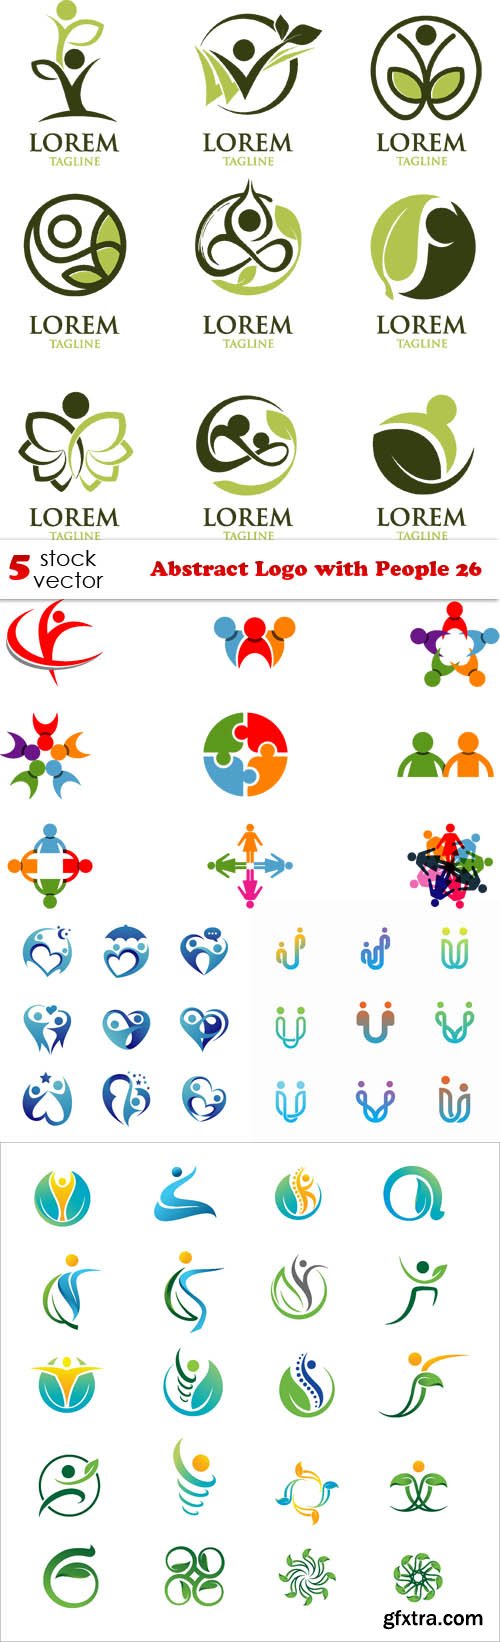 Vectors - Abstract Logo with People 26